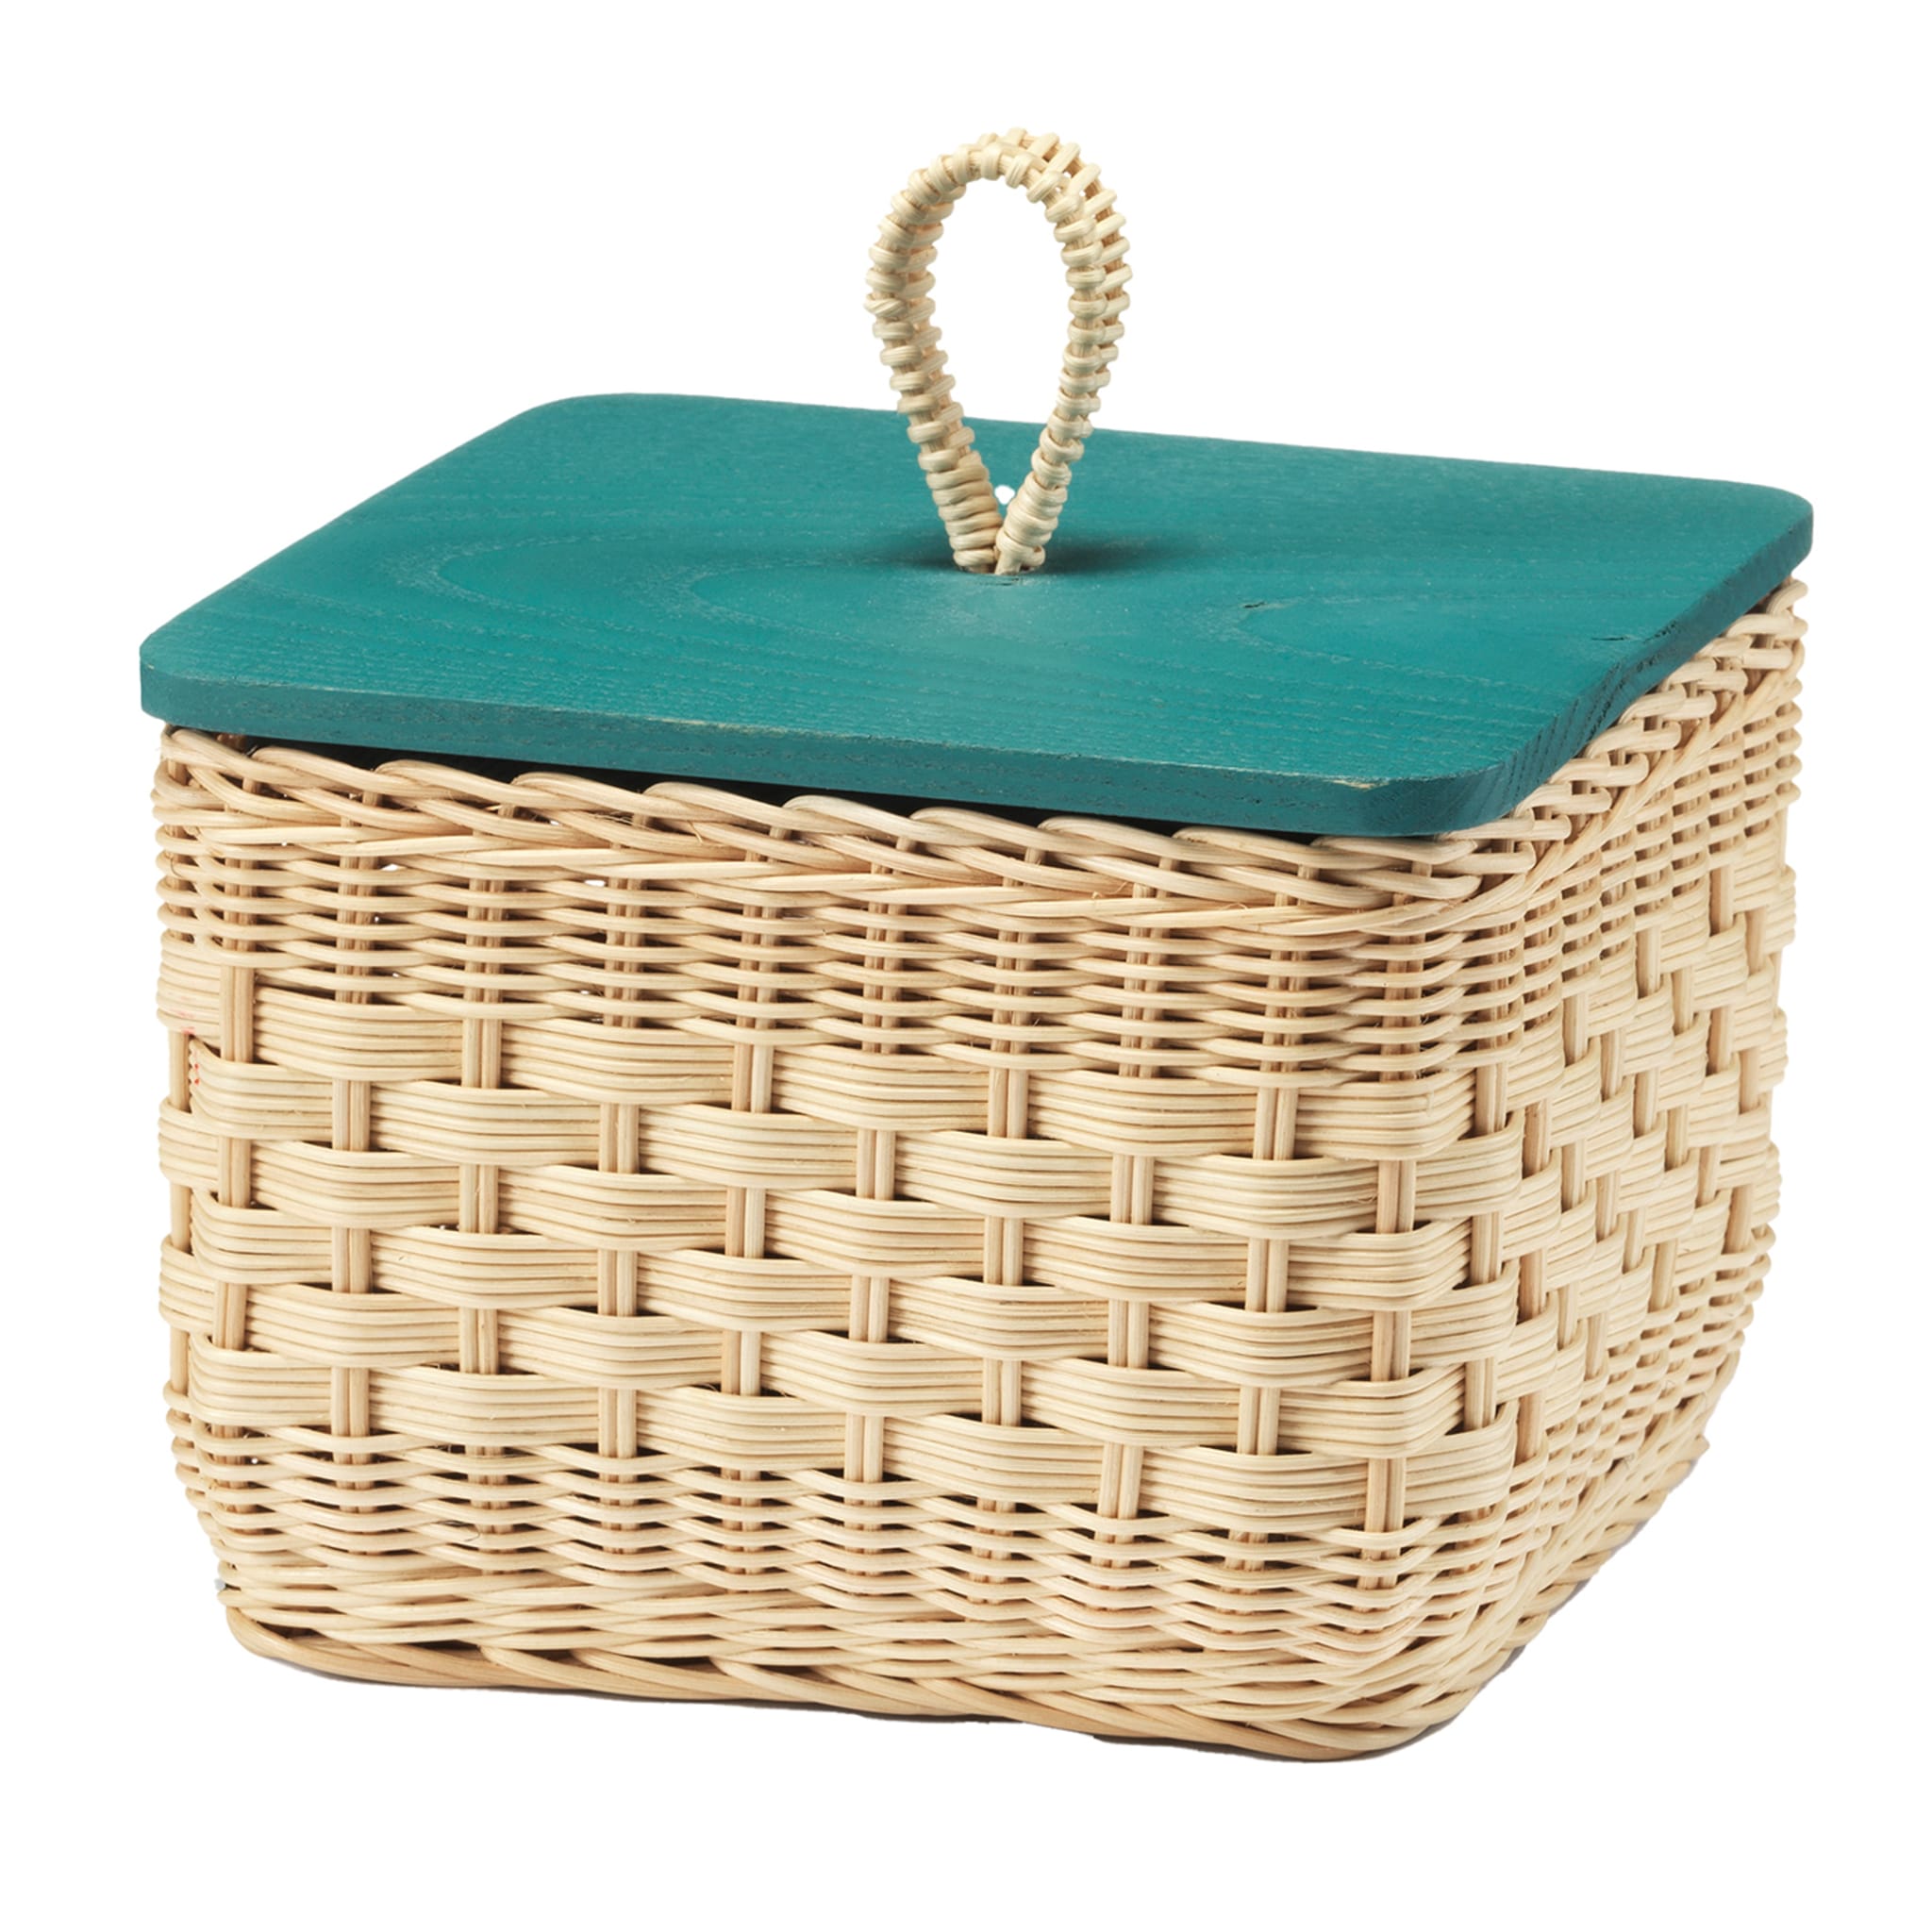 Square-Cut Wicker Container with Teal Lid - Main view